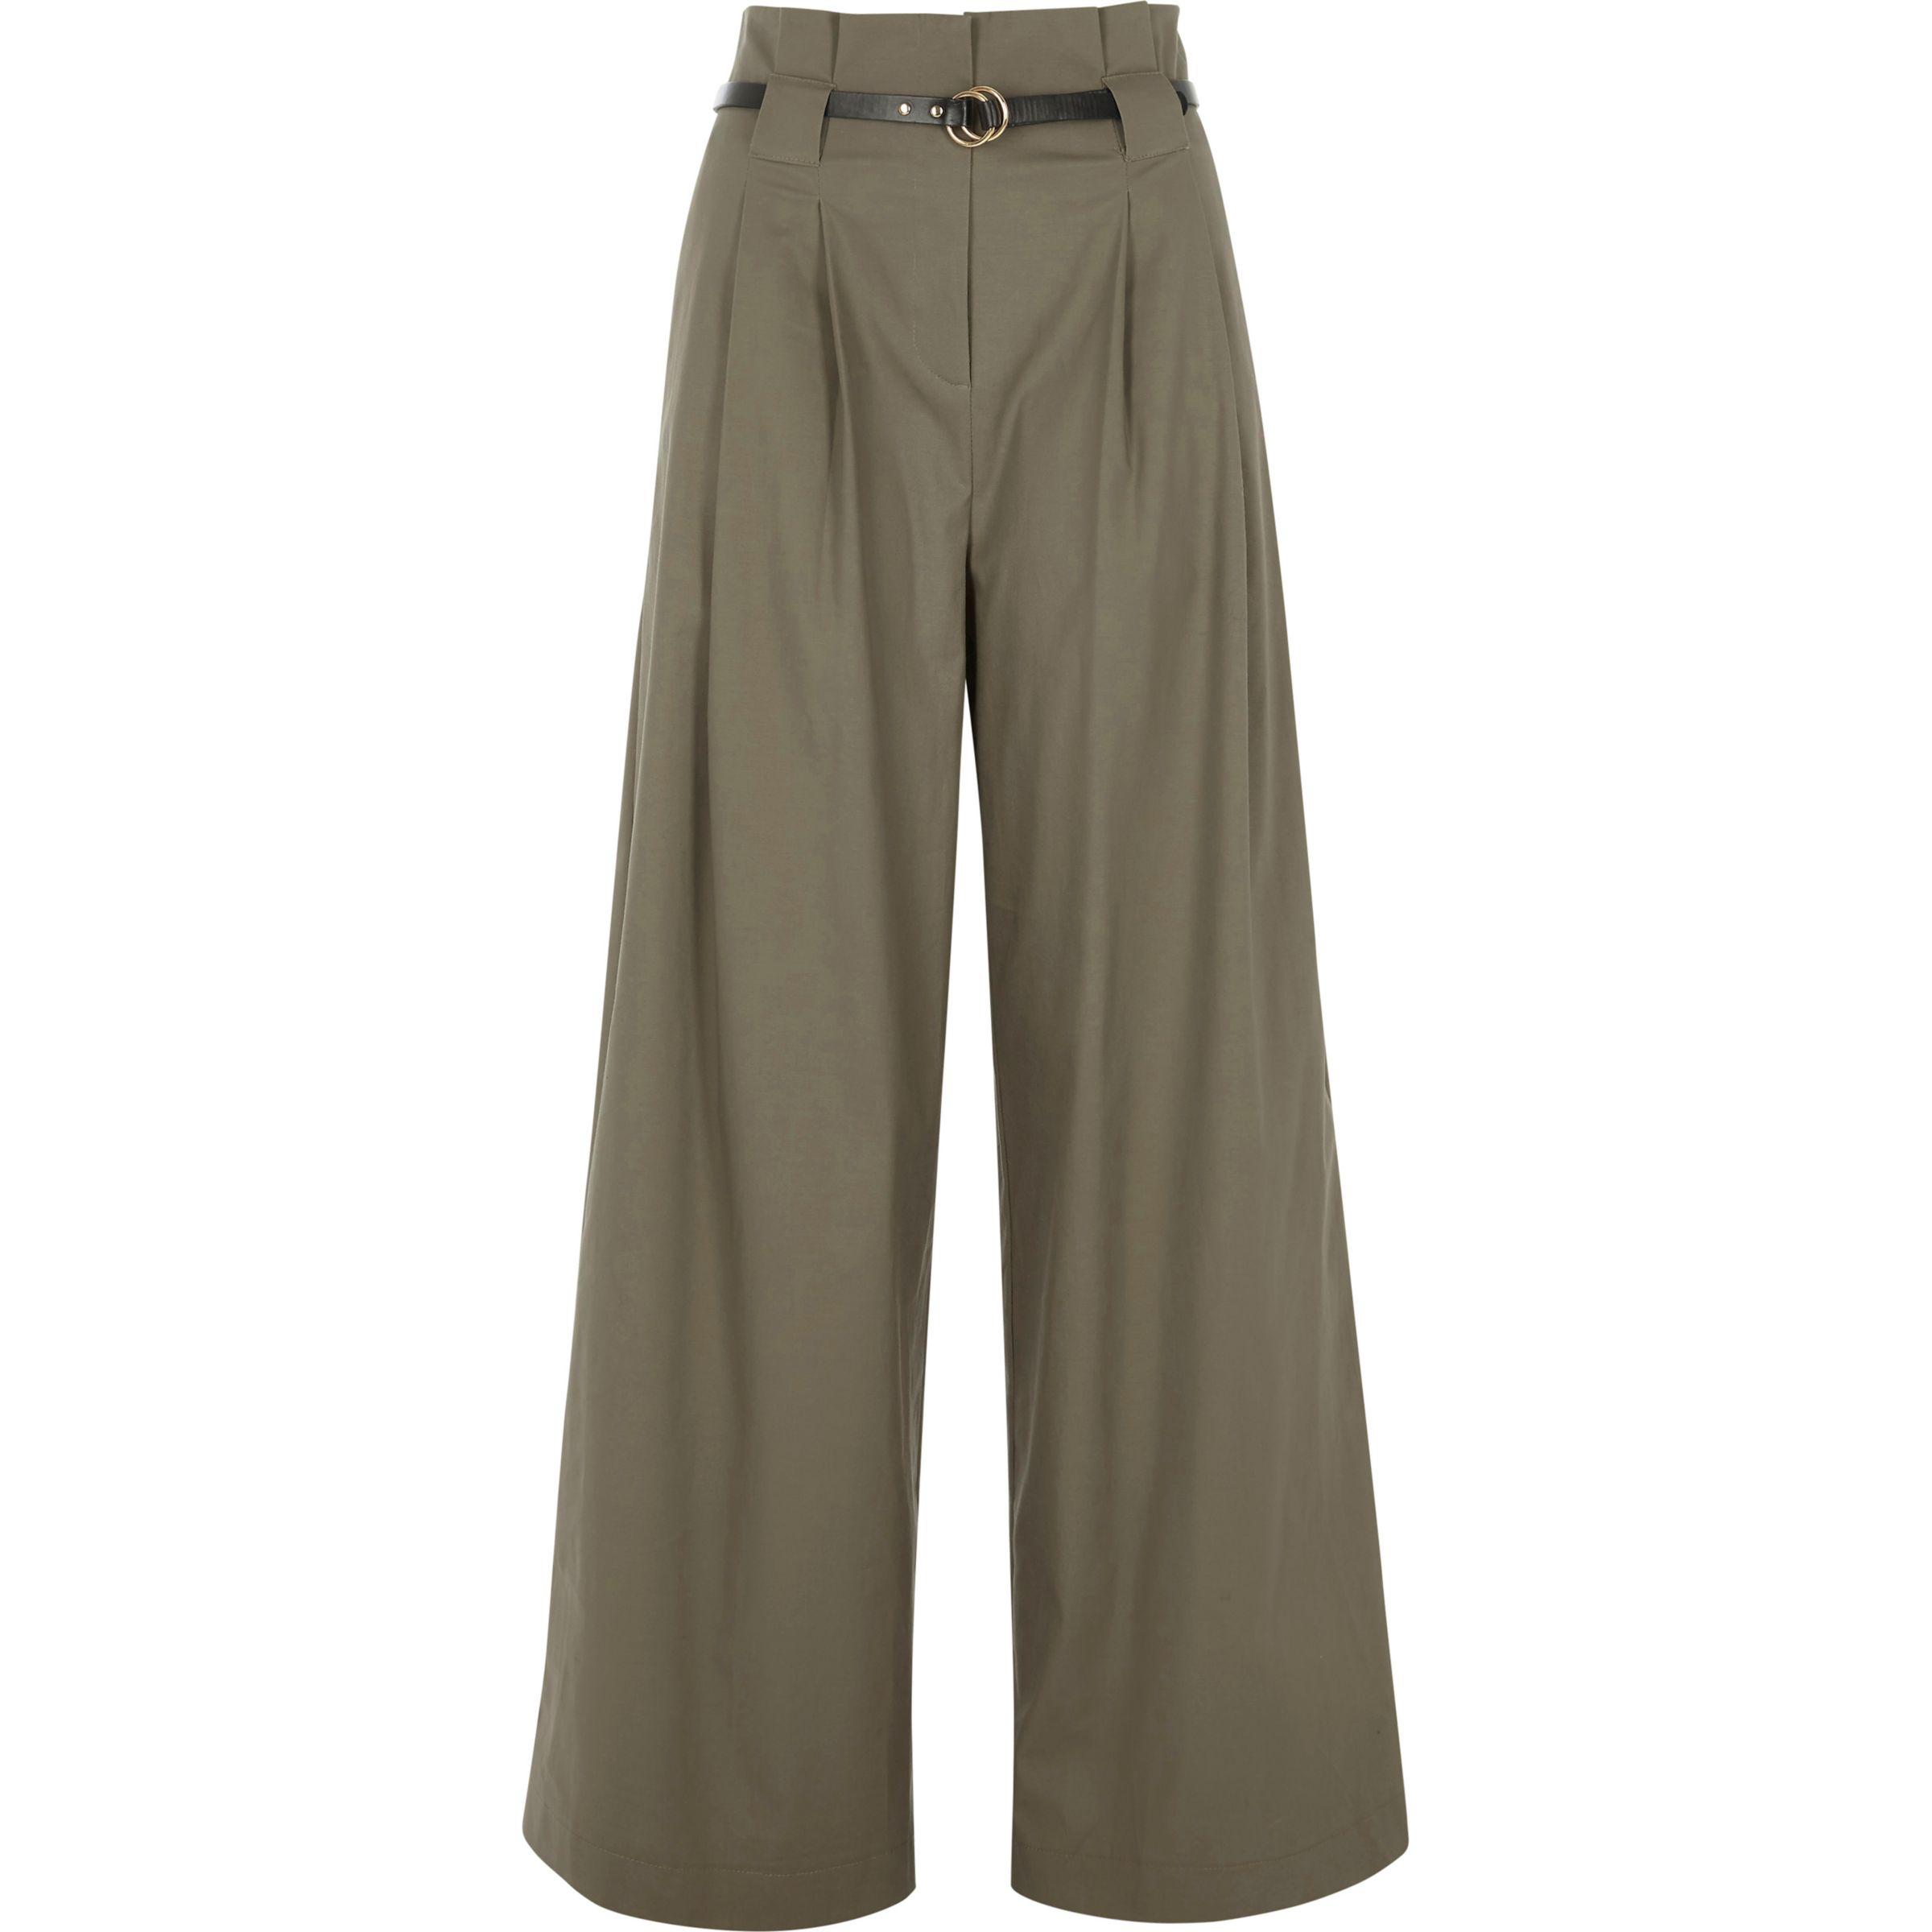 River Island Synthetic High Waisted Belted Wide Leg Trousers in Khaki ...